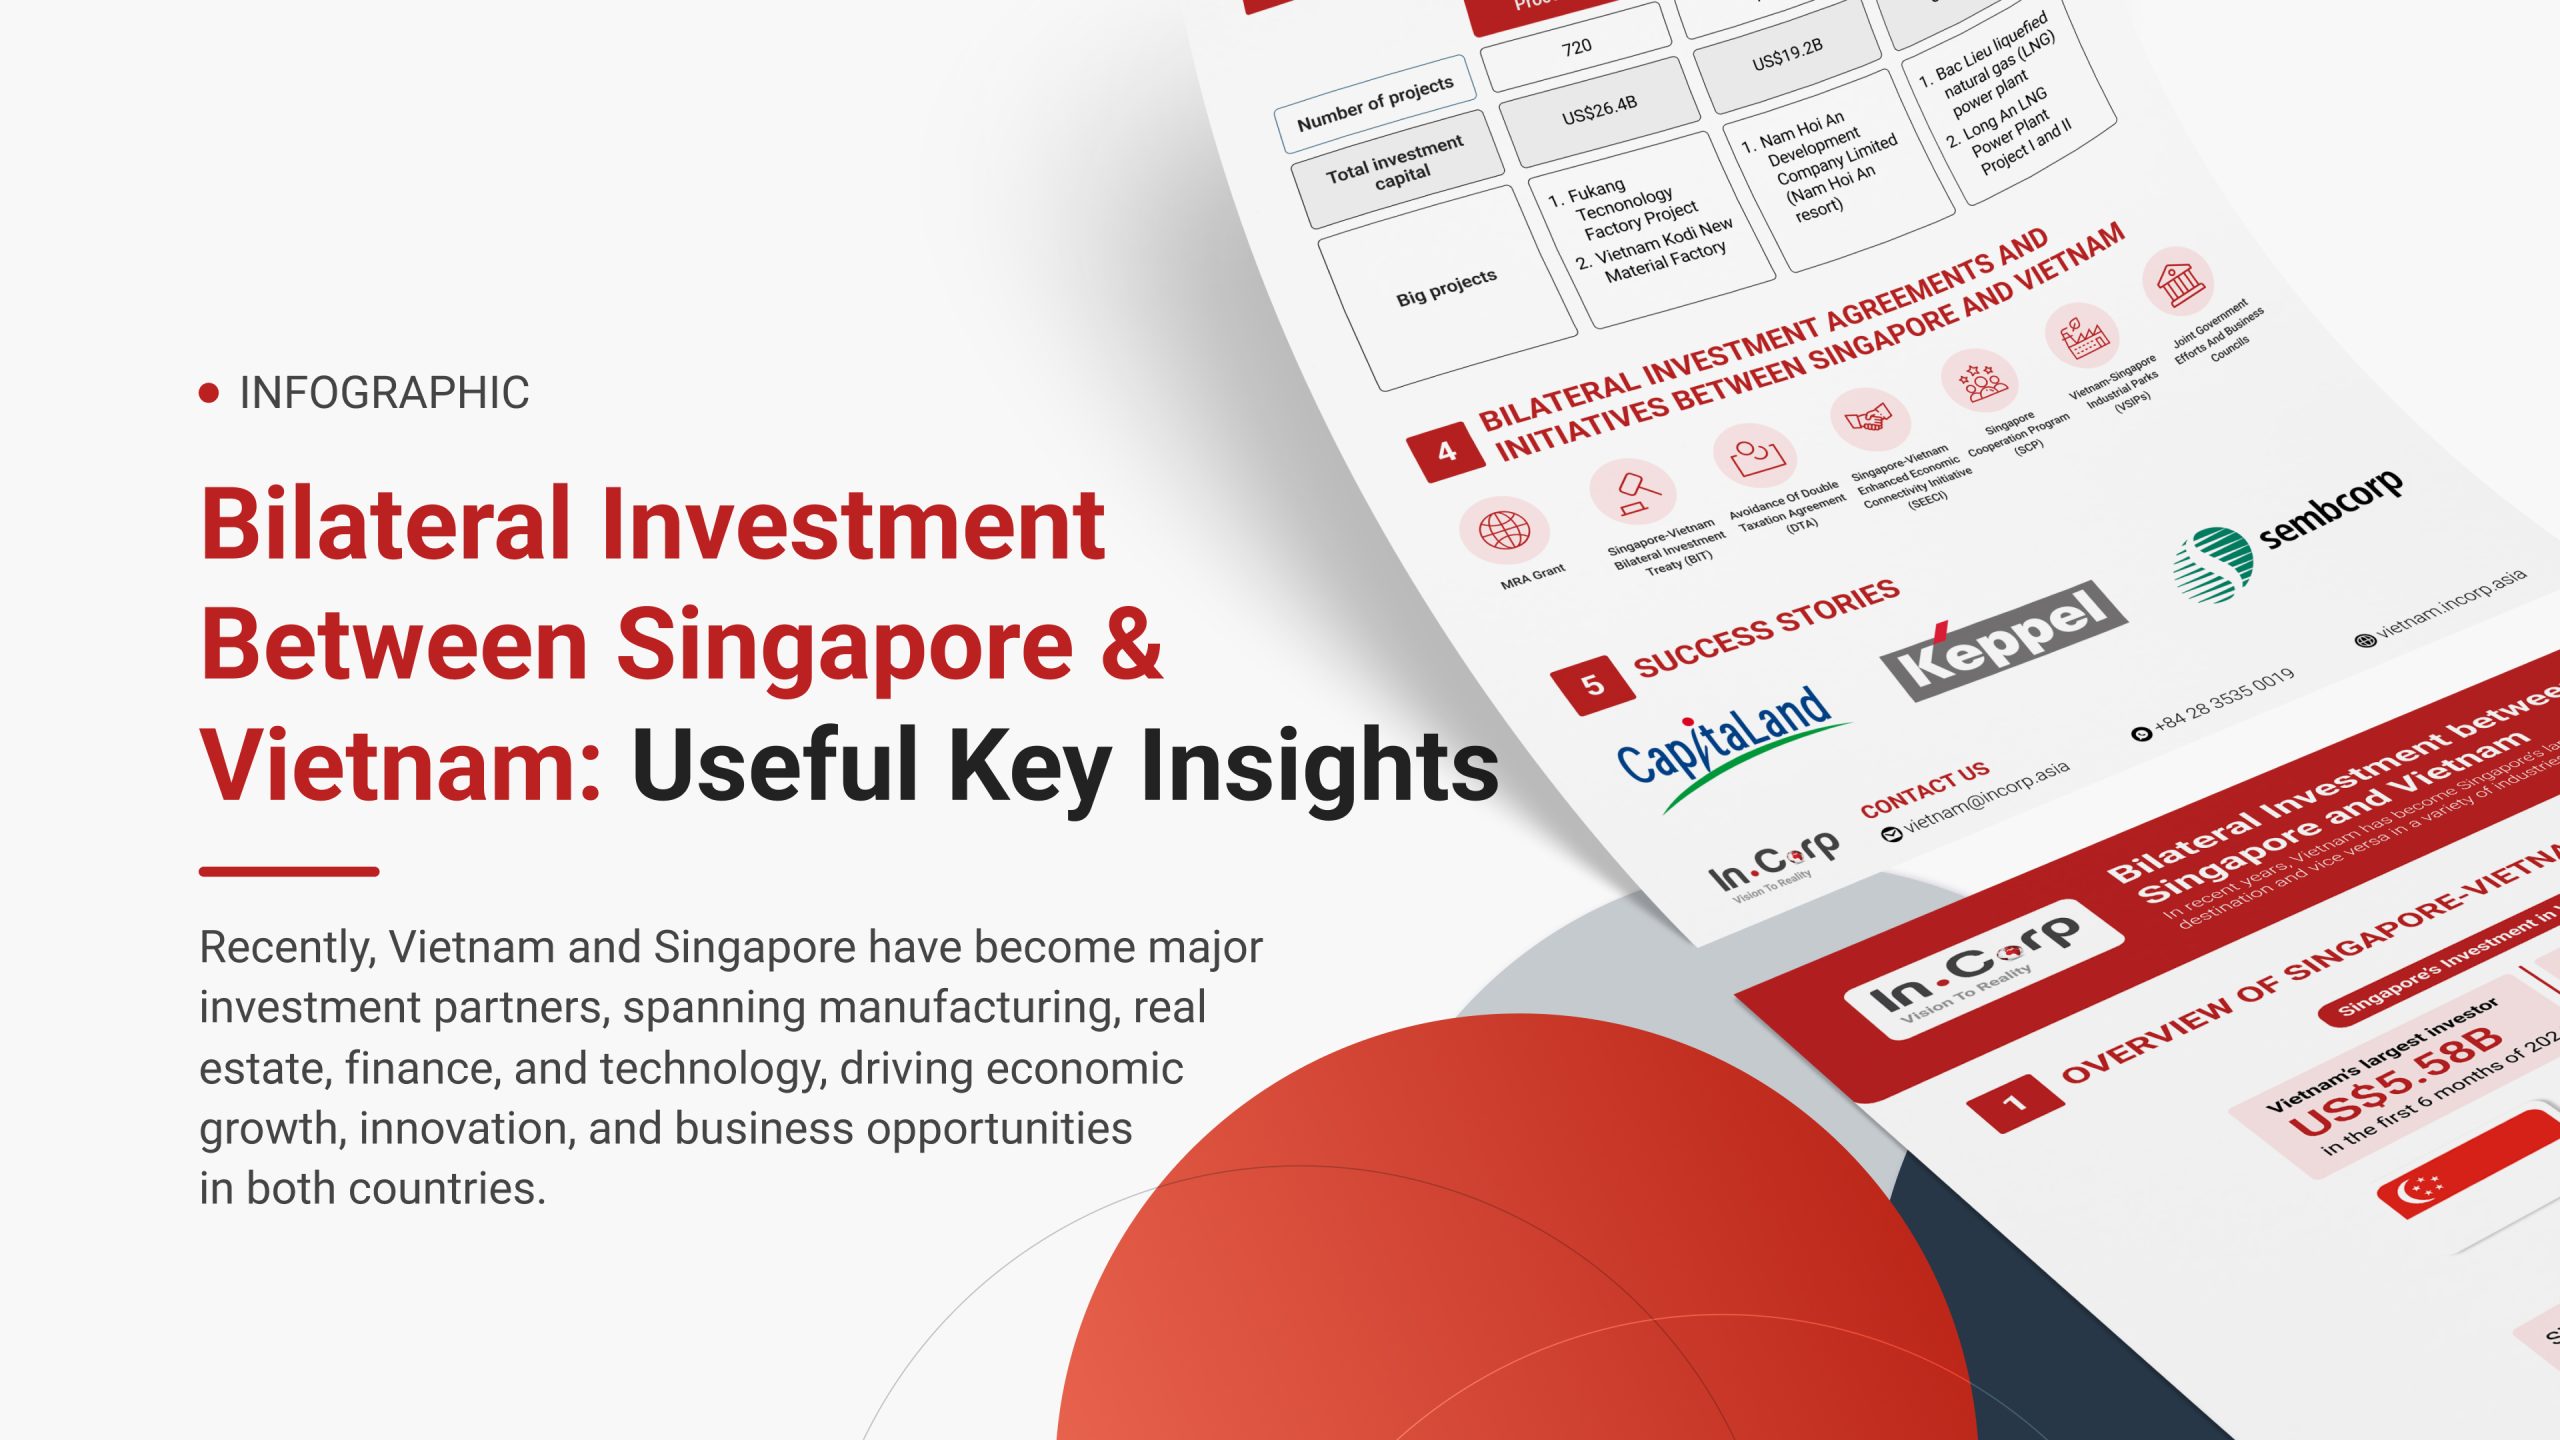 An Overview of Bilateral Investment between Singapore and Vietnam